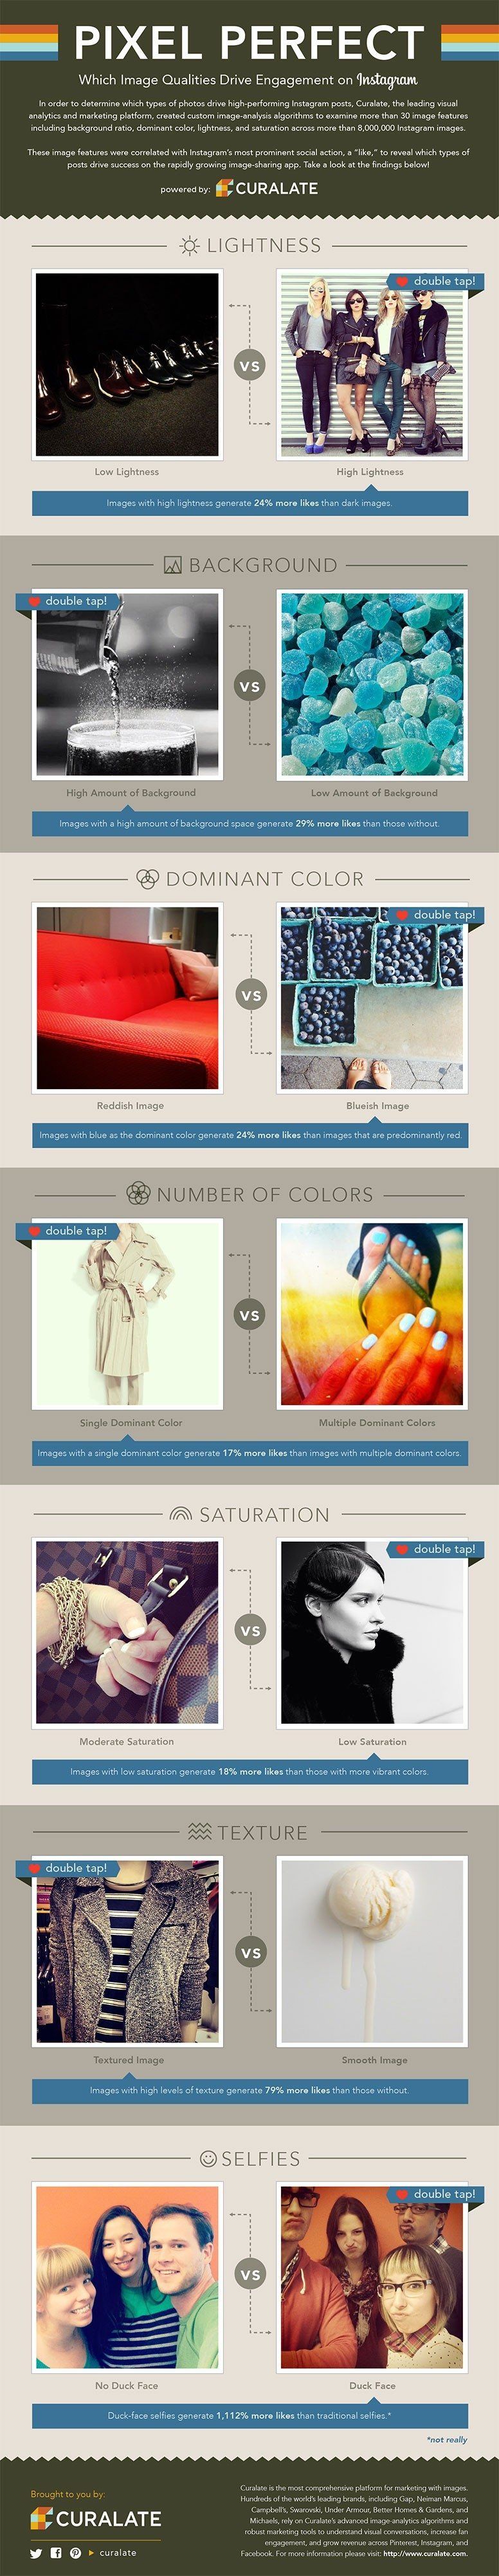 Curalate infographic Instagram